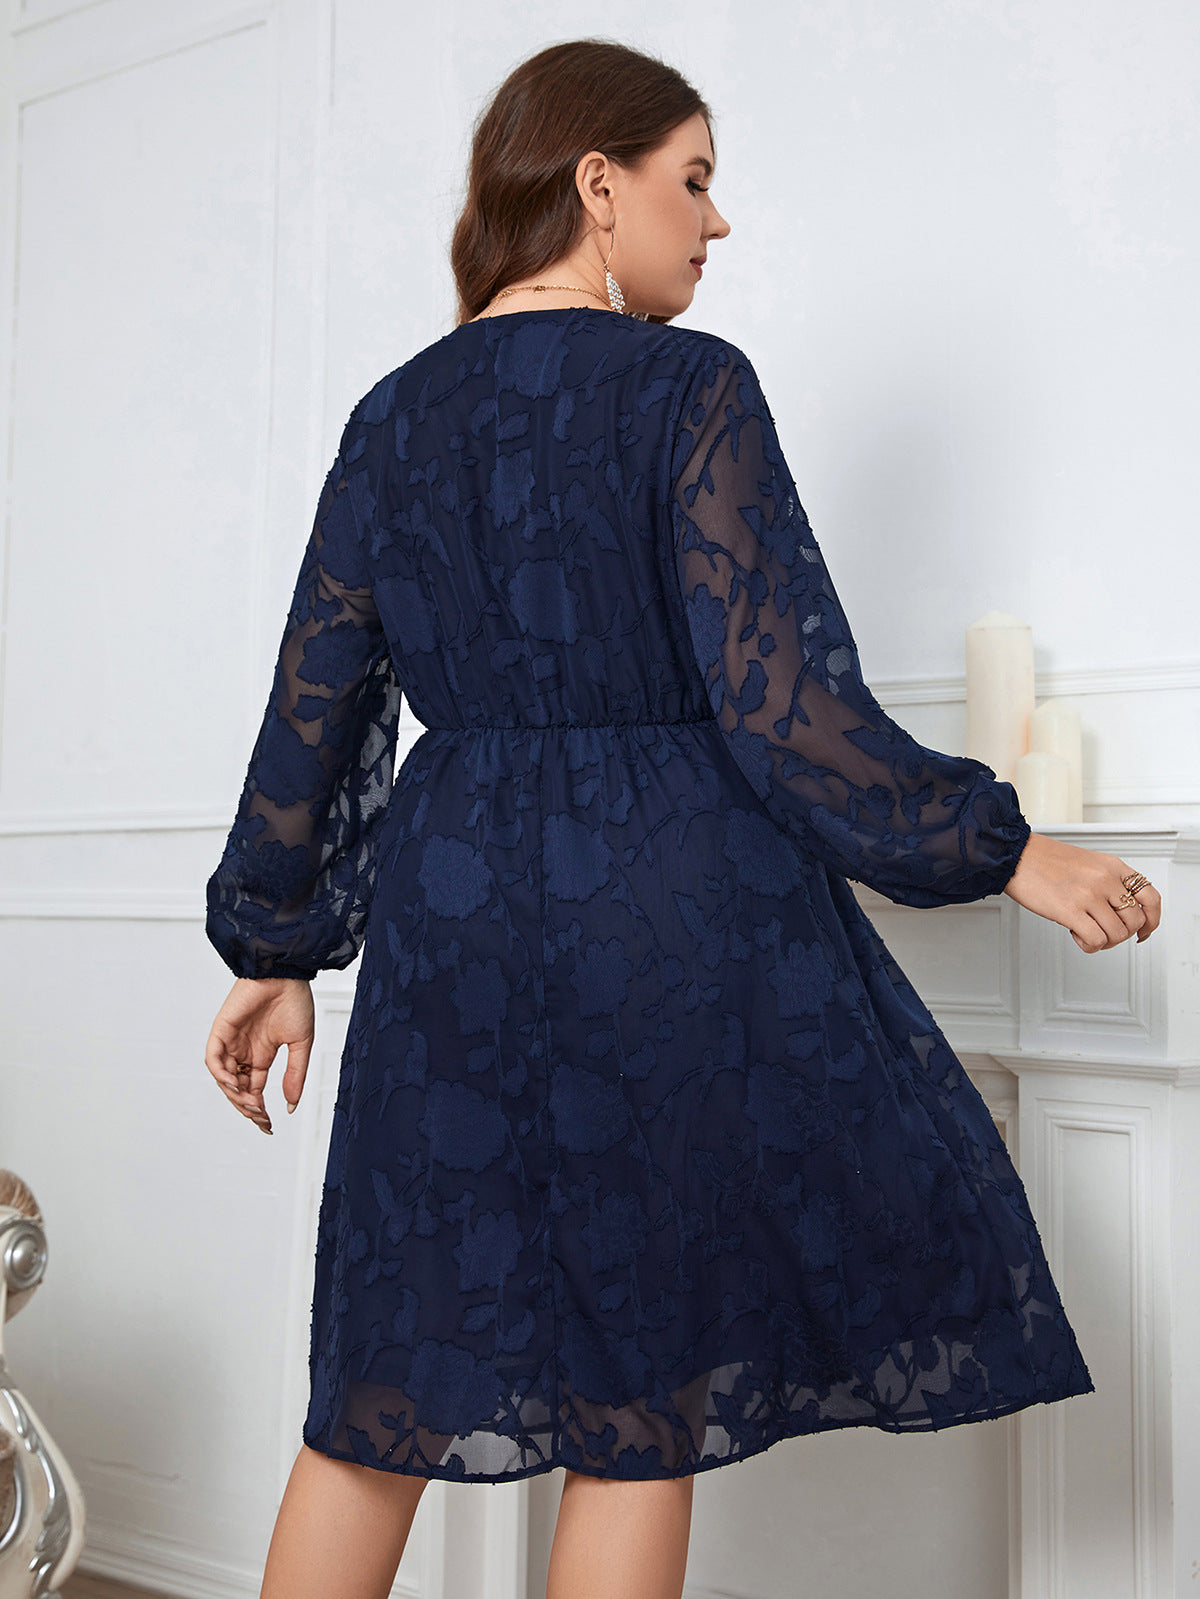 Designed Plus Sizes Lace Dresses-Dresses-Free Shipping at meselling99